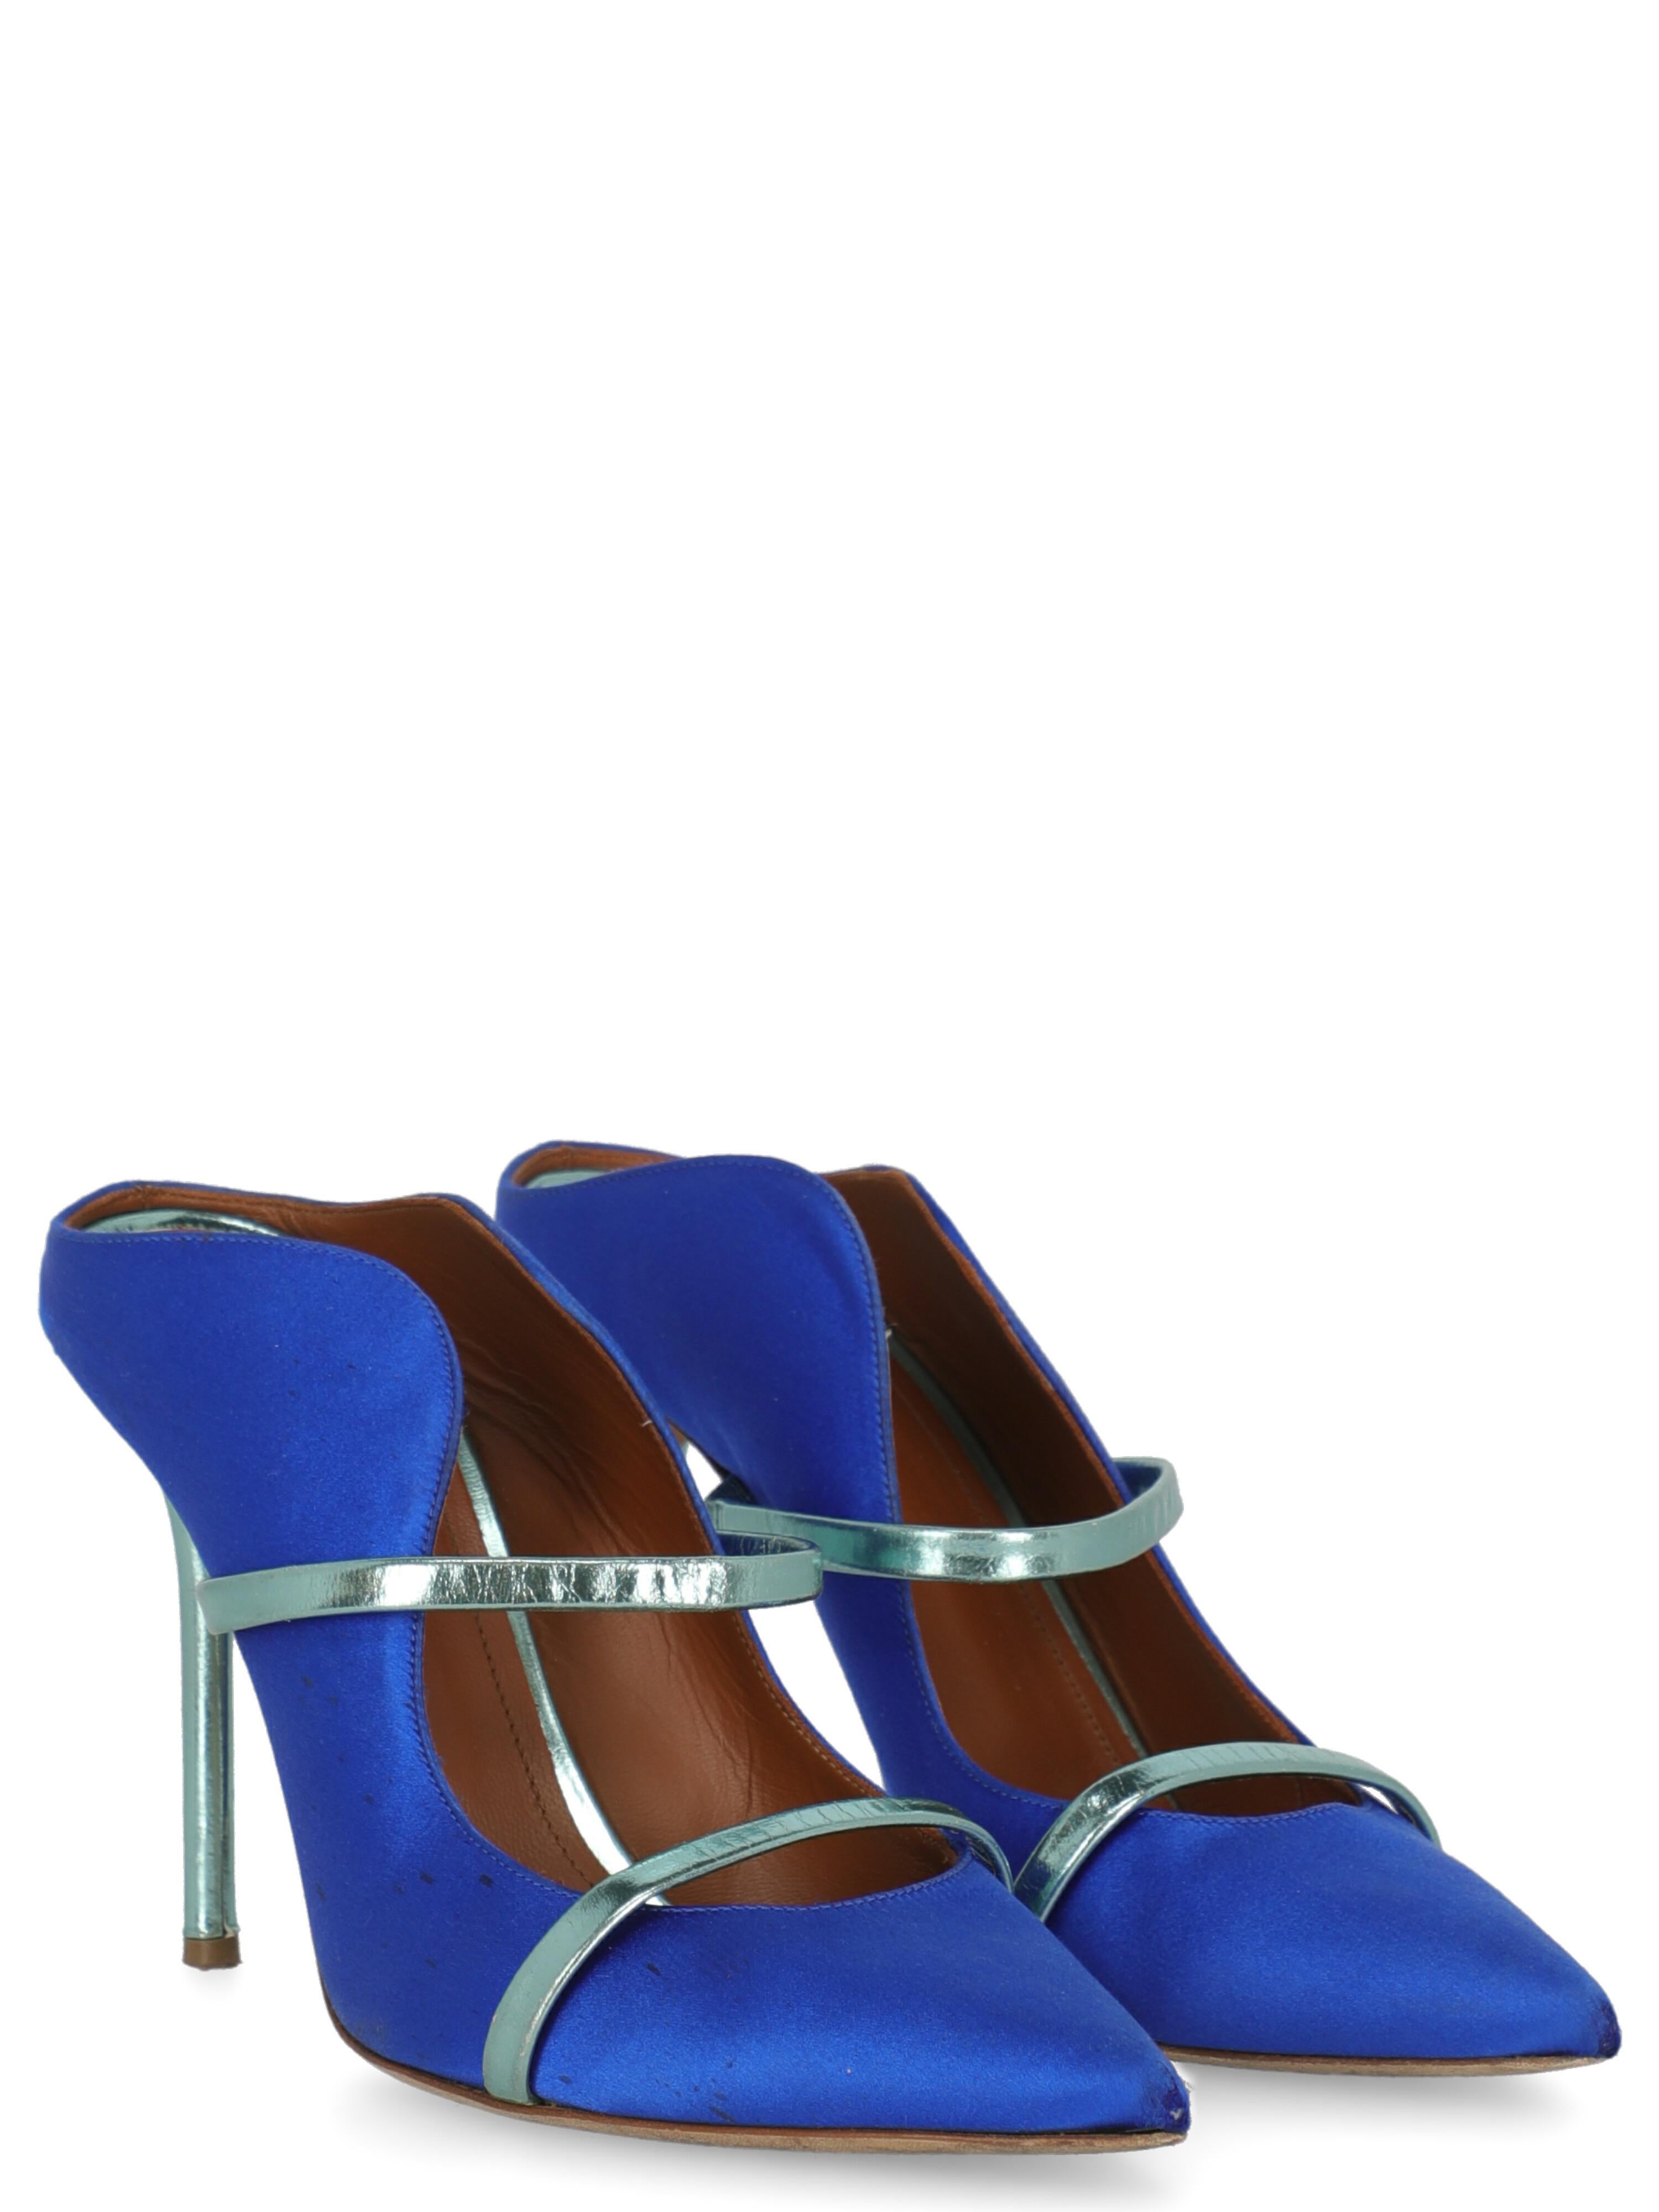 Mules, fabric, solid color, satin effect, pointed toe, branded insole, leather insole, tapered heel, high heel

Includes: N/A

Product Condition: Good
Heel: visible scratches. Sole: visible signs of use. Upper: visible abrasion, visible stains.